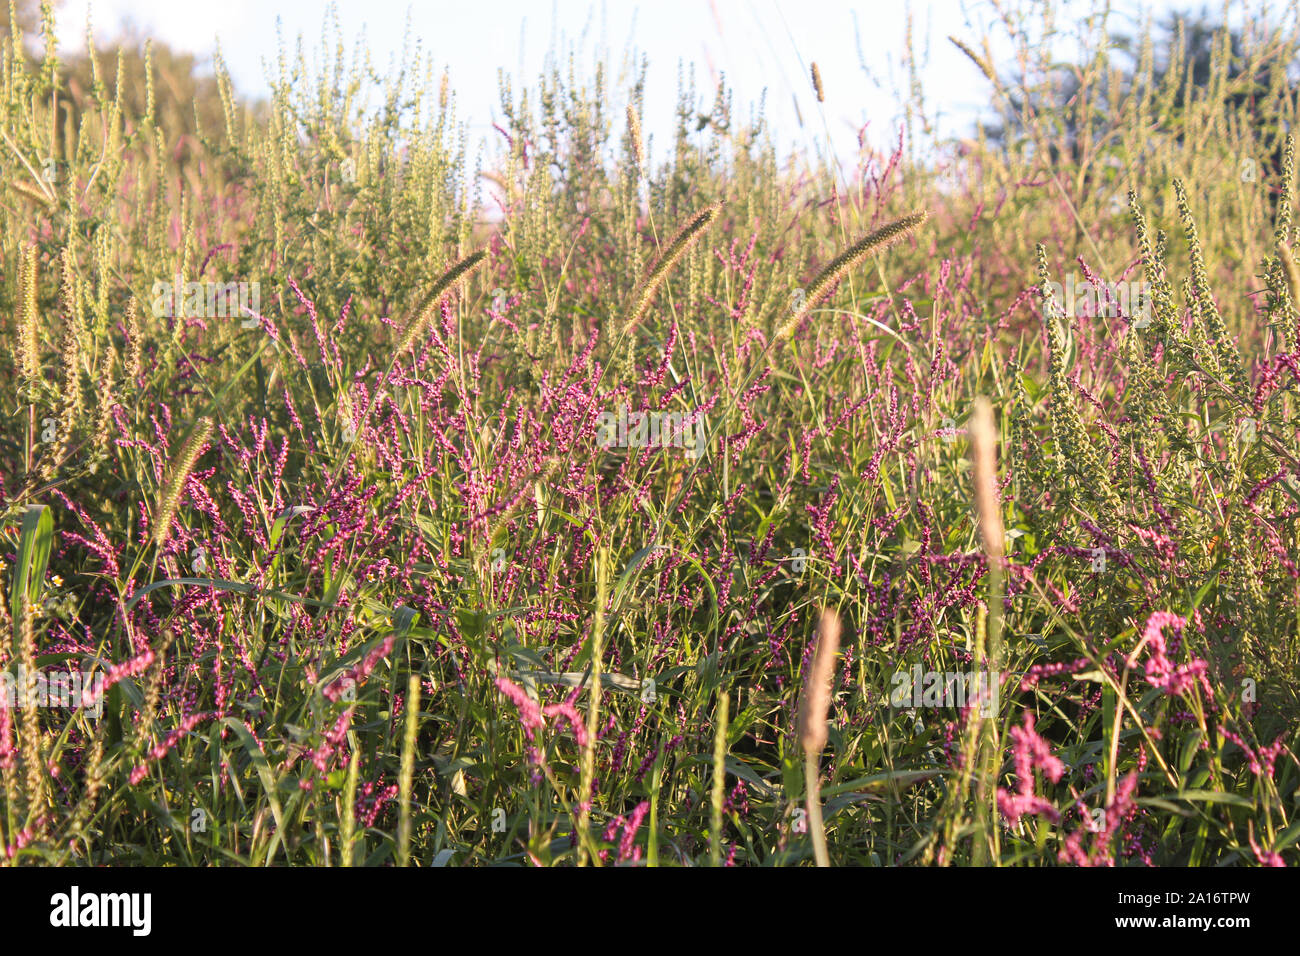 Pink Lady's Thumb Field Weed In Ohio Stock Photo